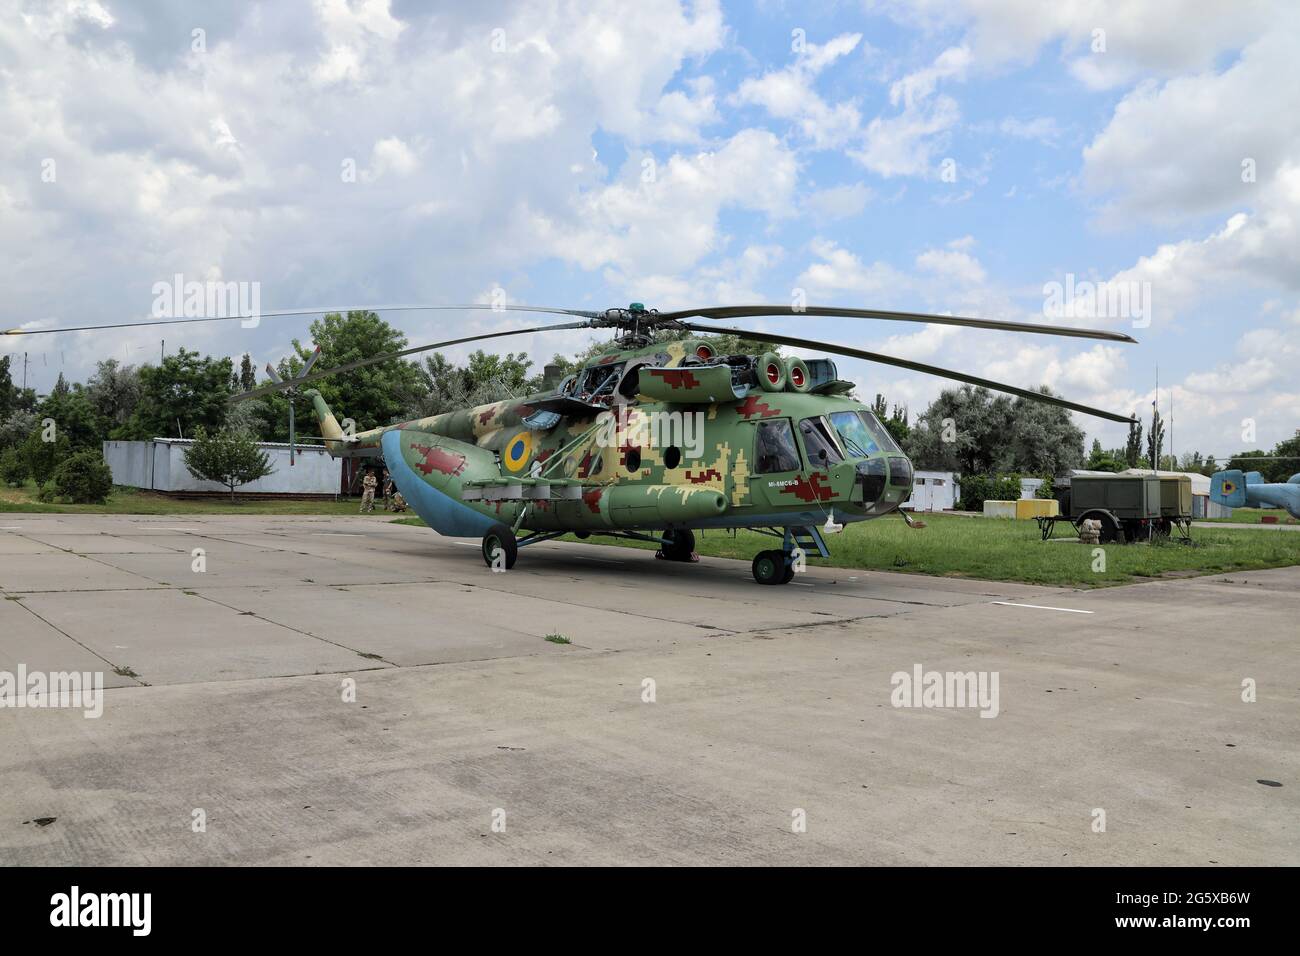 MYKOLAIV, UKRAINE - JUNE 30, 2021 - A helicopter is pictured at the Kulbakyne aerodrome during the Exercise Sea Breeze 2021, Mykolaiv, southern Ukraine. Stock Photo